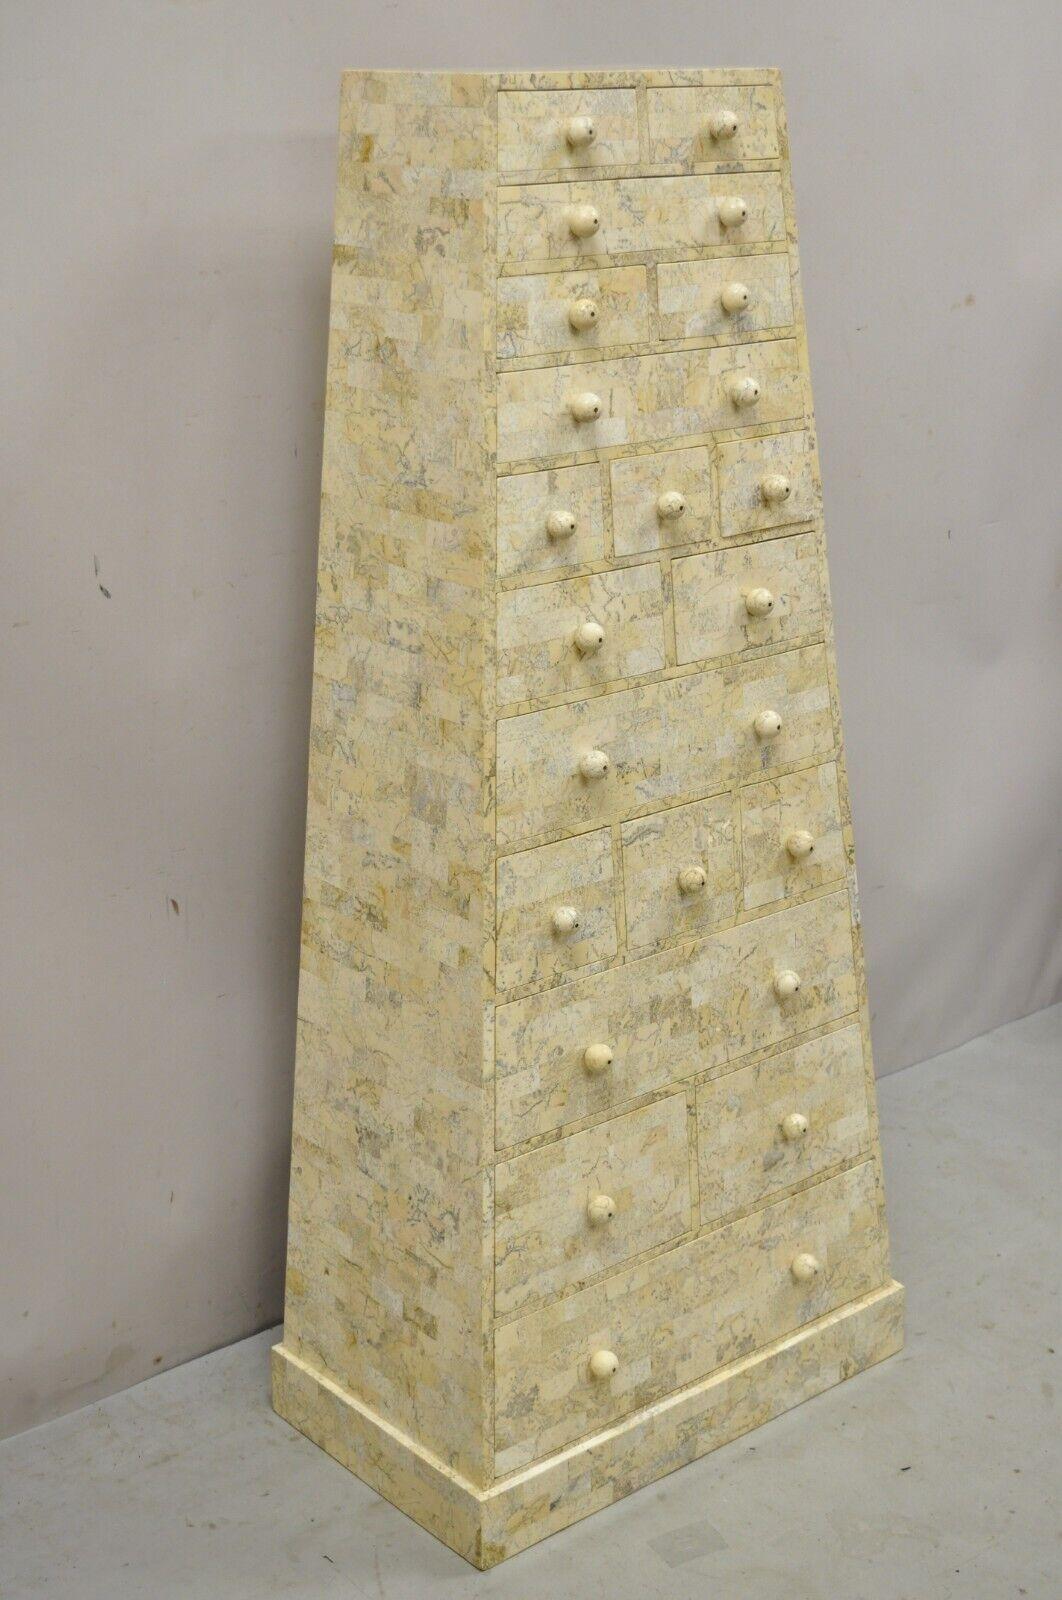 Maitland Smith tessellated marble stone pyramid chest of drawers. Item features tessellated stone marble inlay, asymmetrical pyramid shape, finished back, original label, 19 drawers, very nice vintage item, quality craftsmanship, great style and